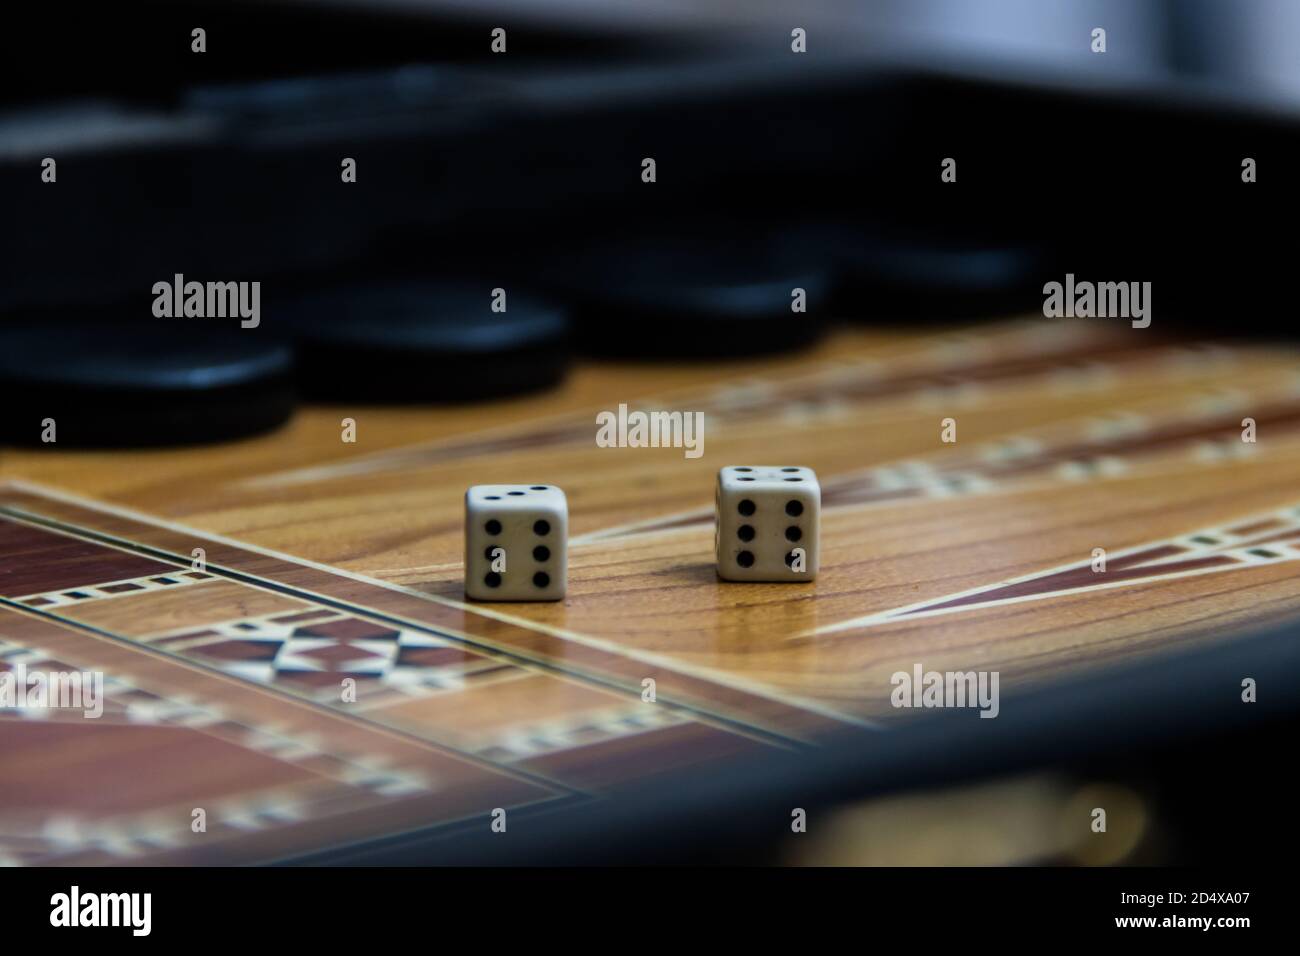 A pair of dice on a backgammon board Stock Photo